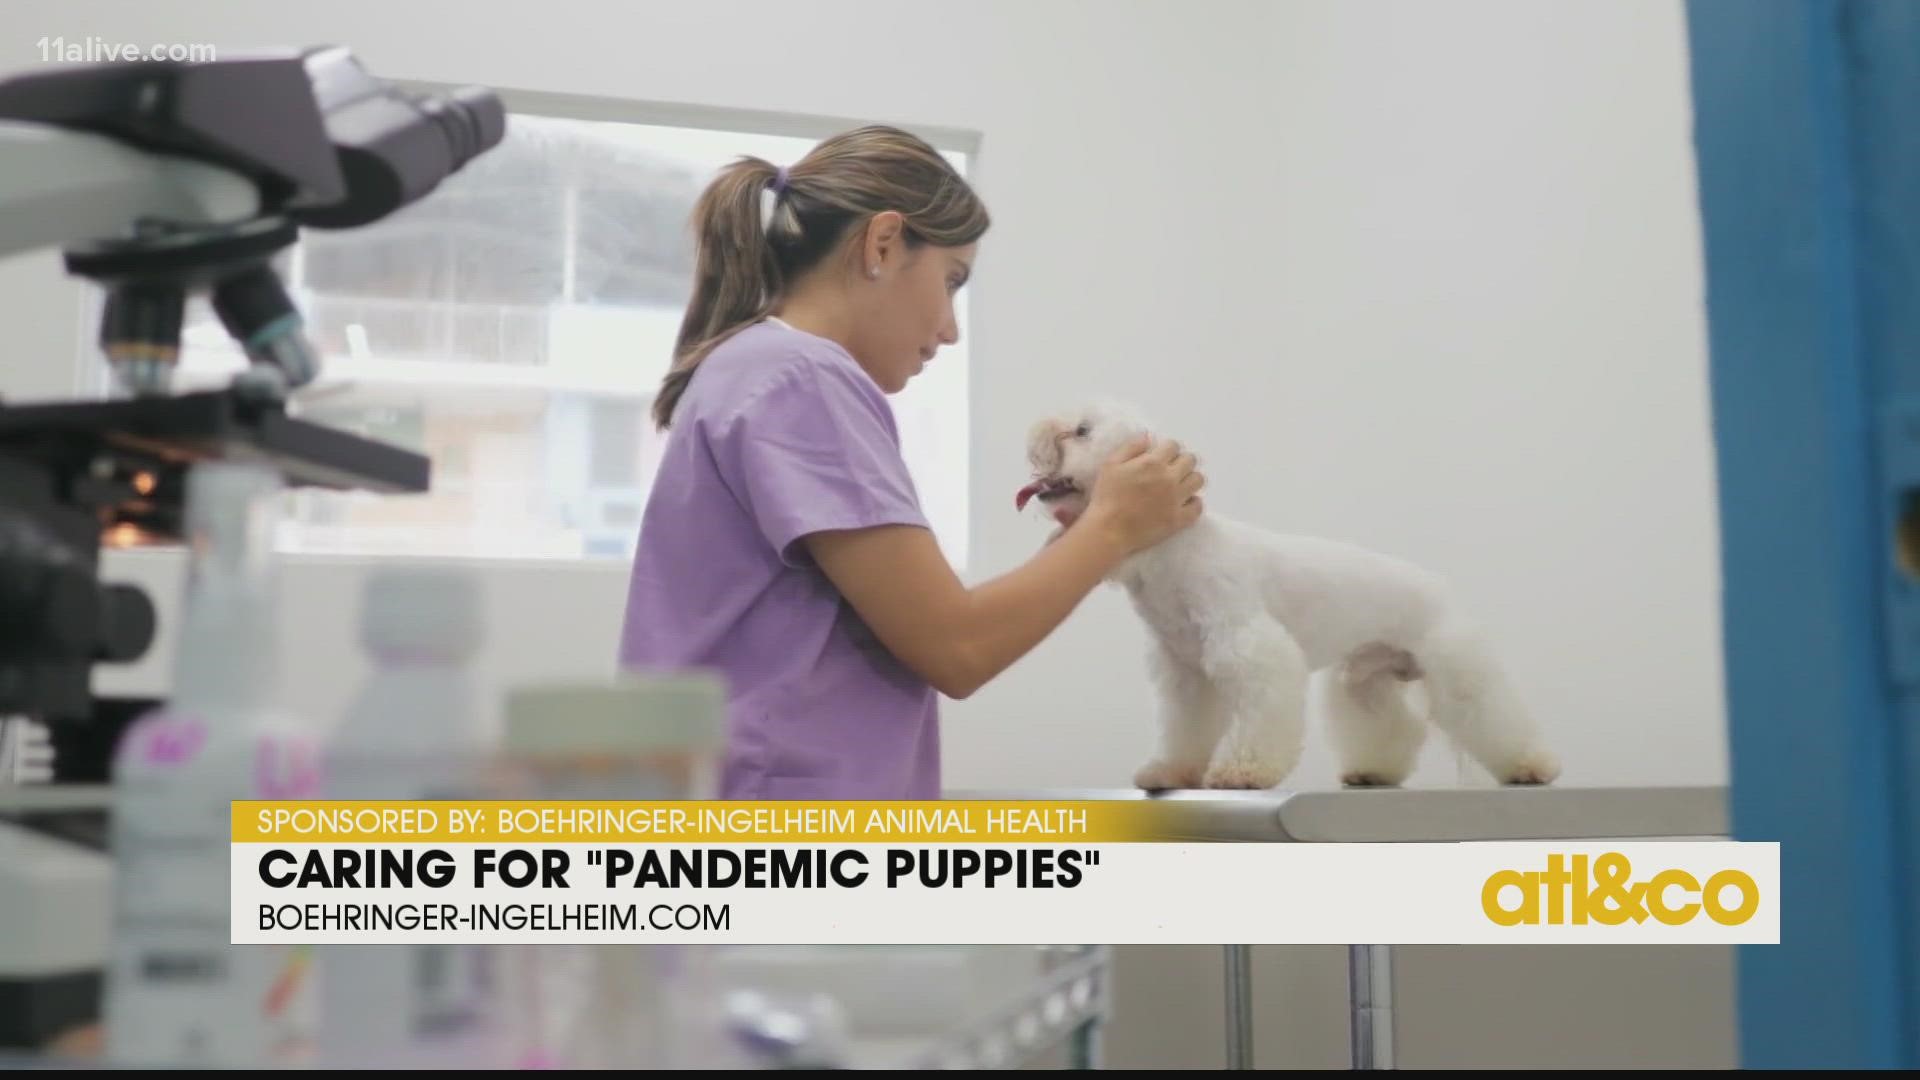 Dr. Andy Eschner shares tips for pet owners caring for adopted pandemic puppies, now-adult dogs.